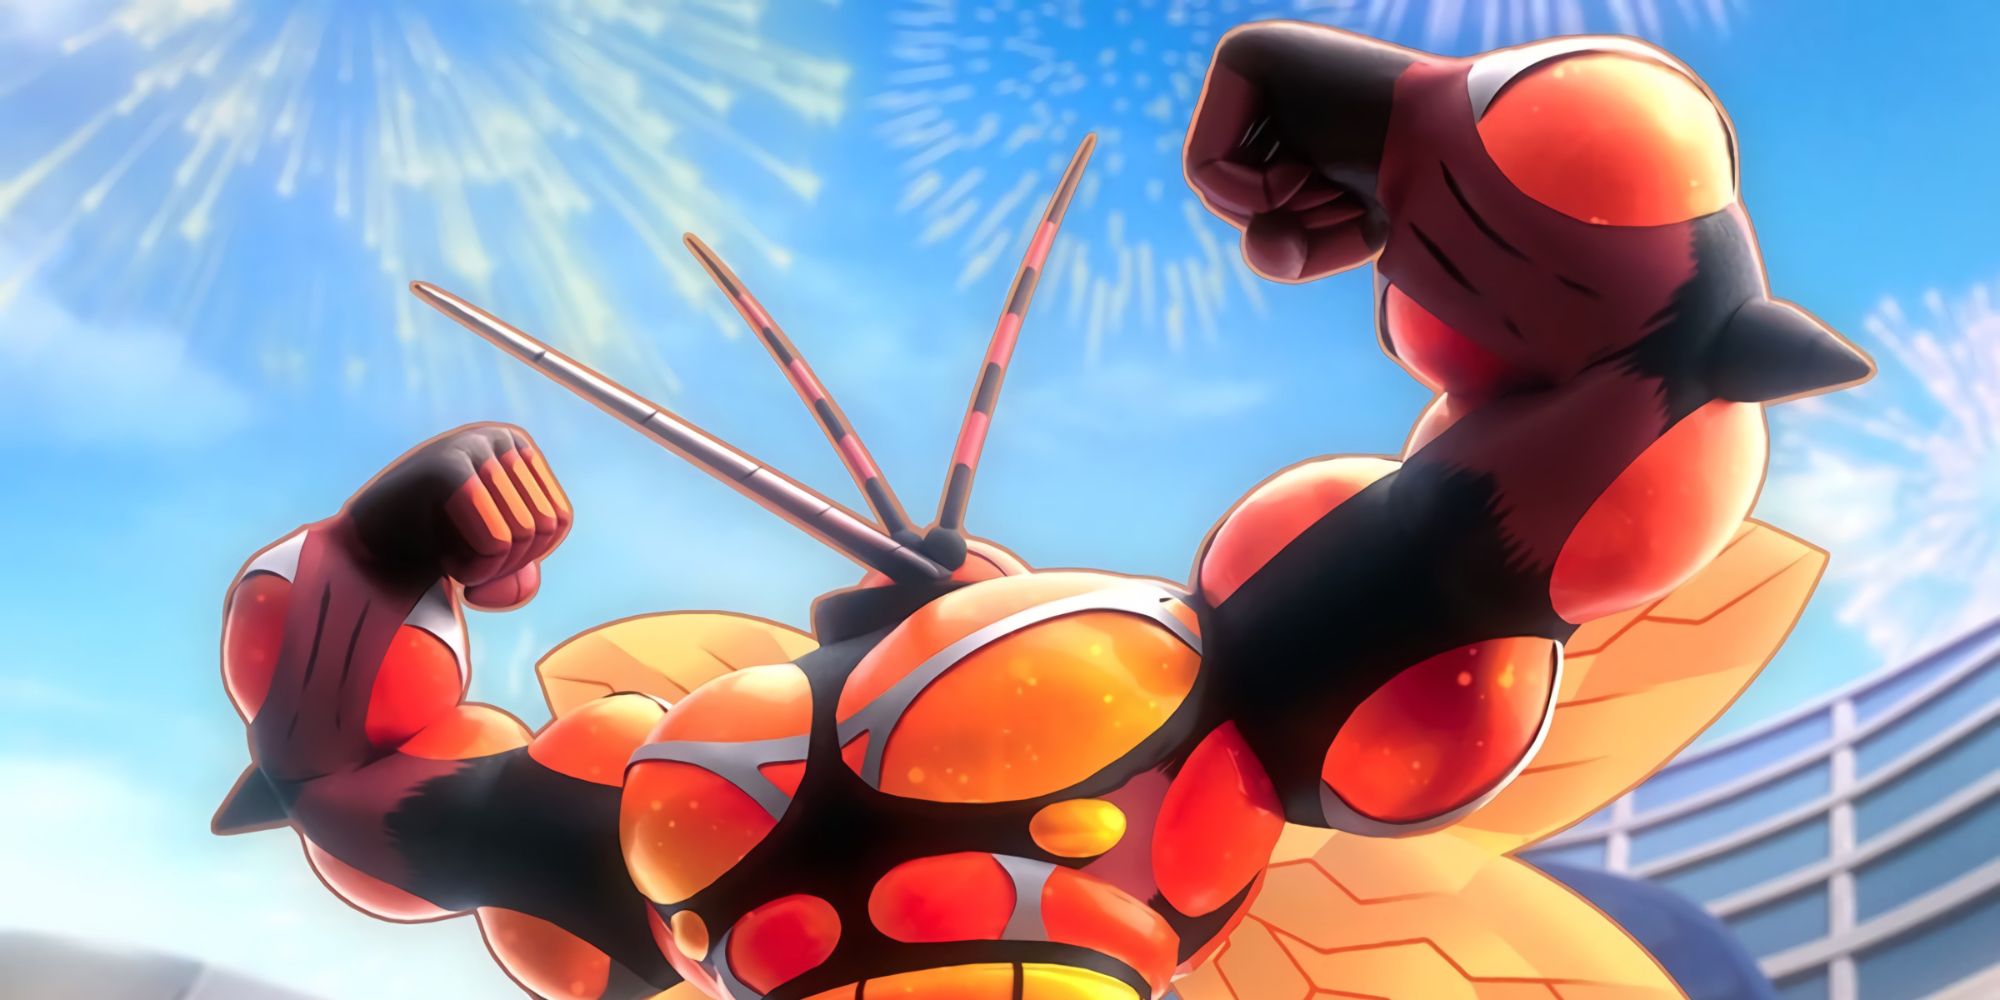 Sword and Shield's Gigantamax gimmick made Buzzwole worse.